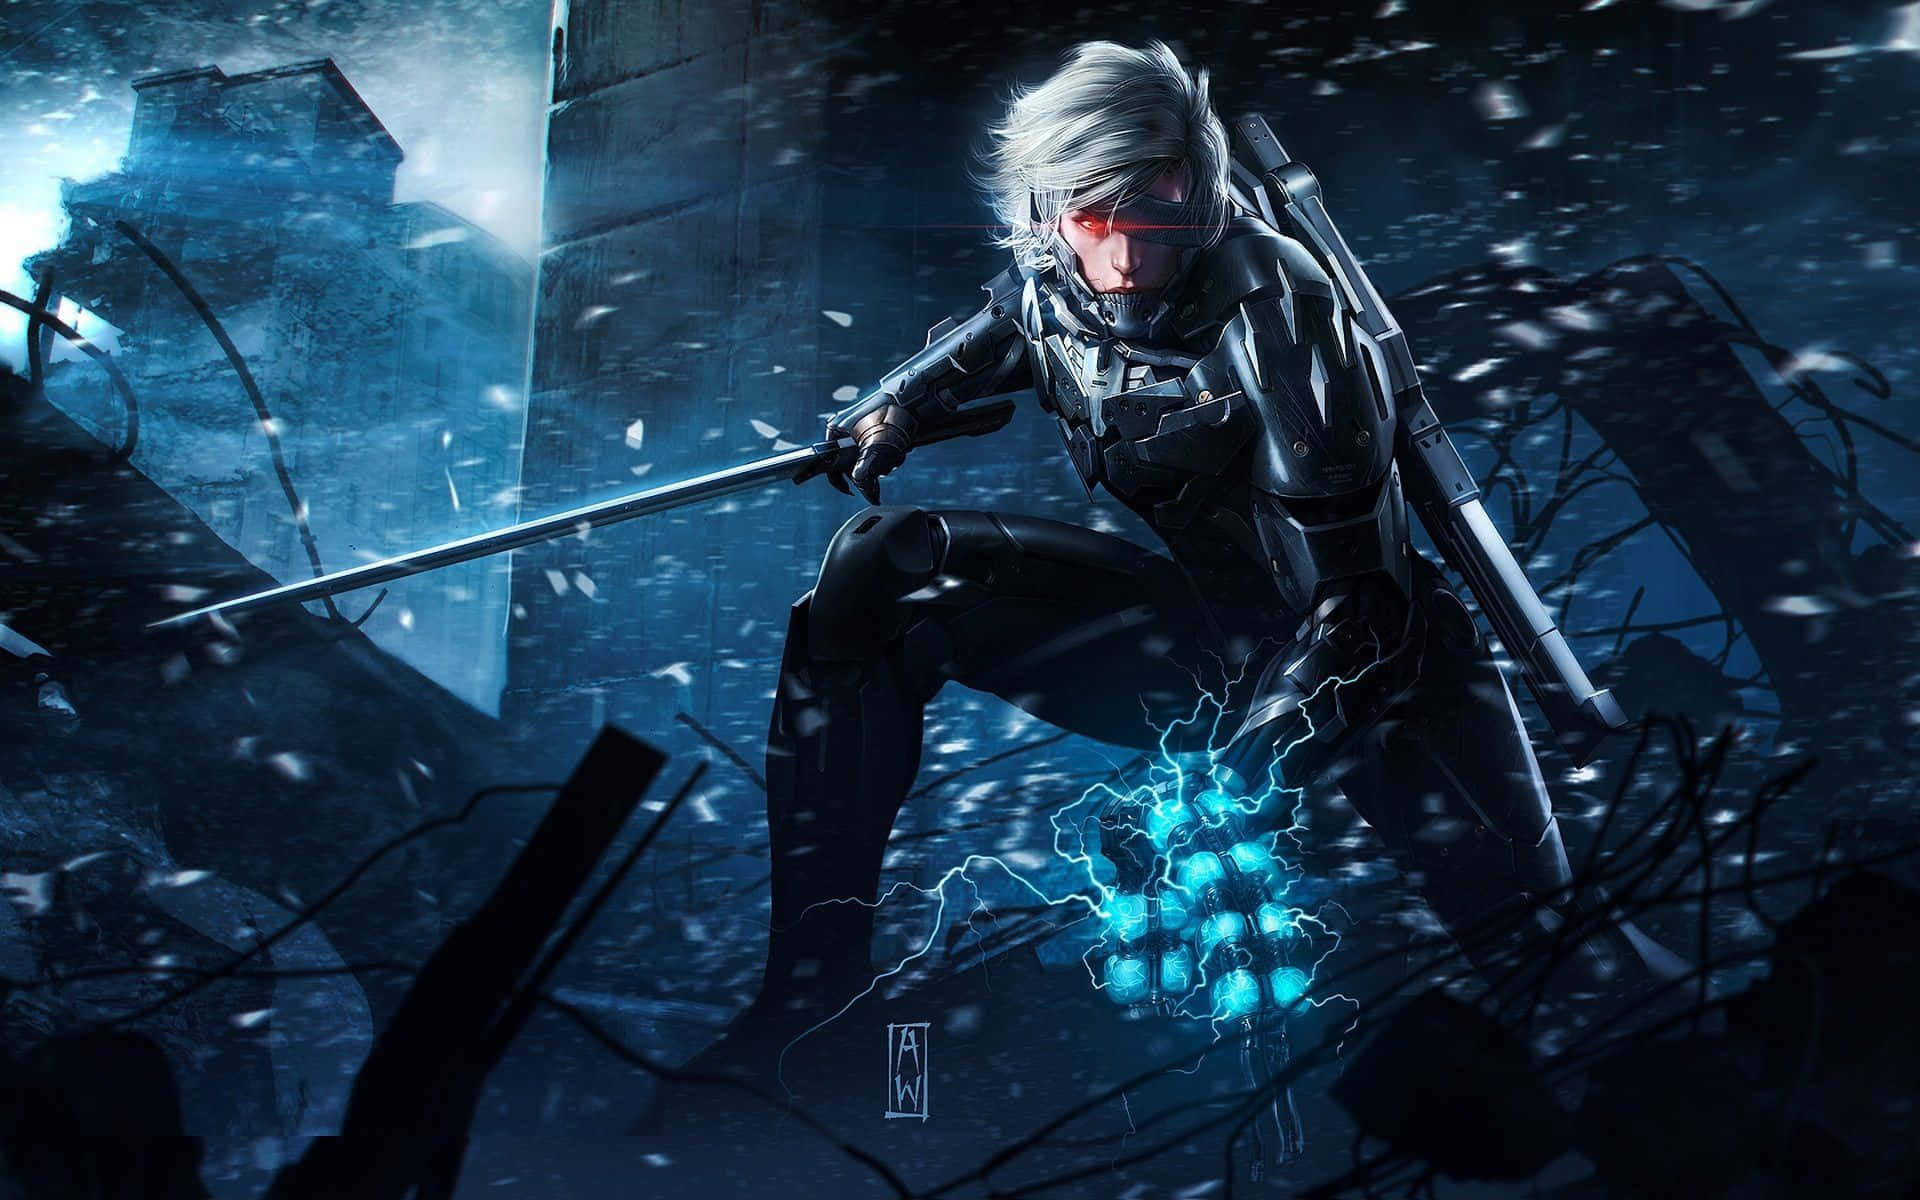 Intense Action In High Definition From Metal Gear Rising Game